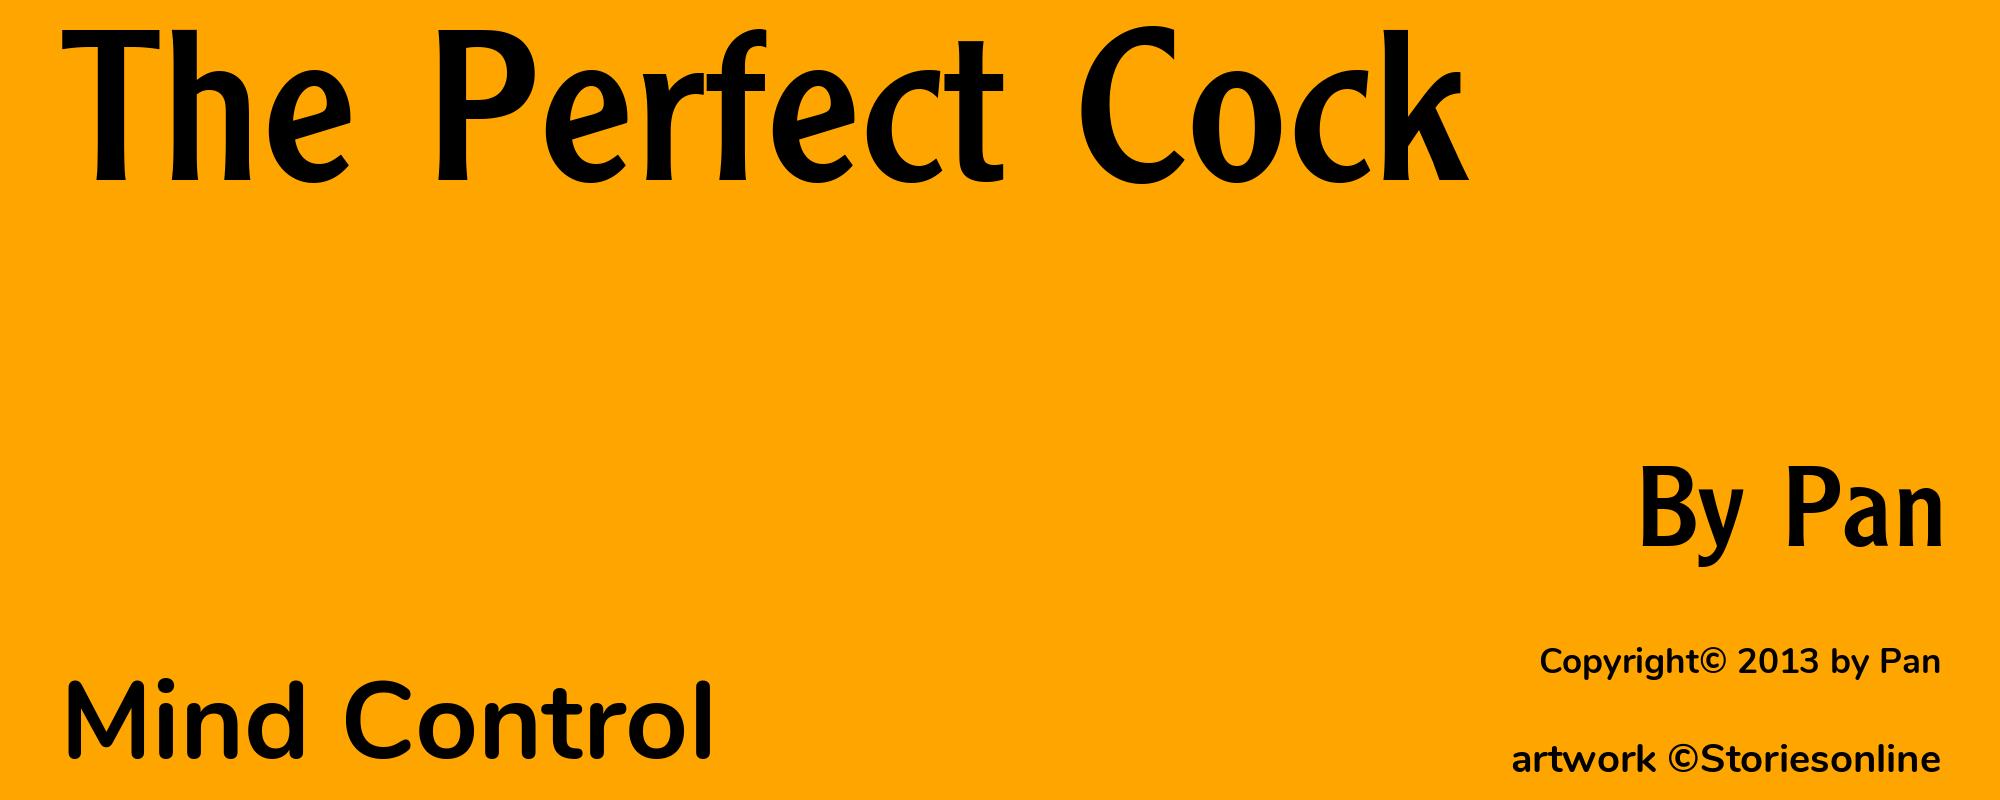 The Perfect Cock - Cover